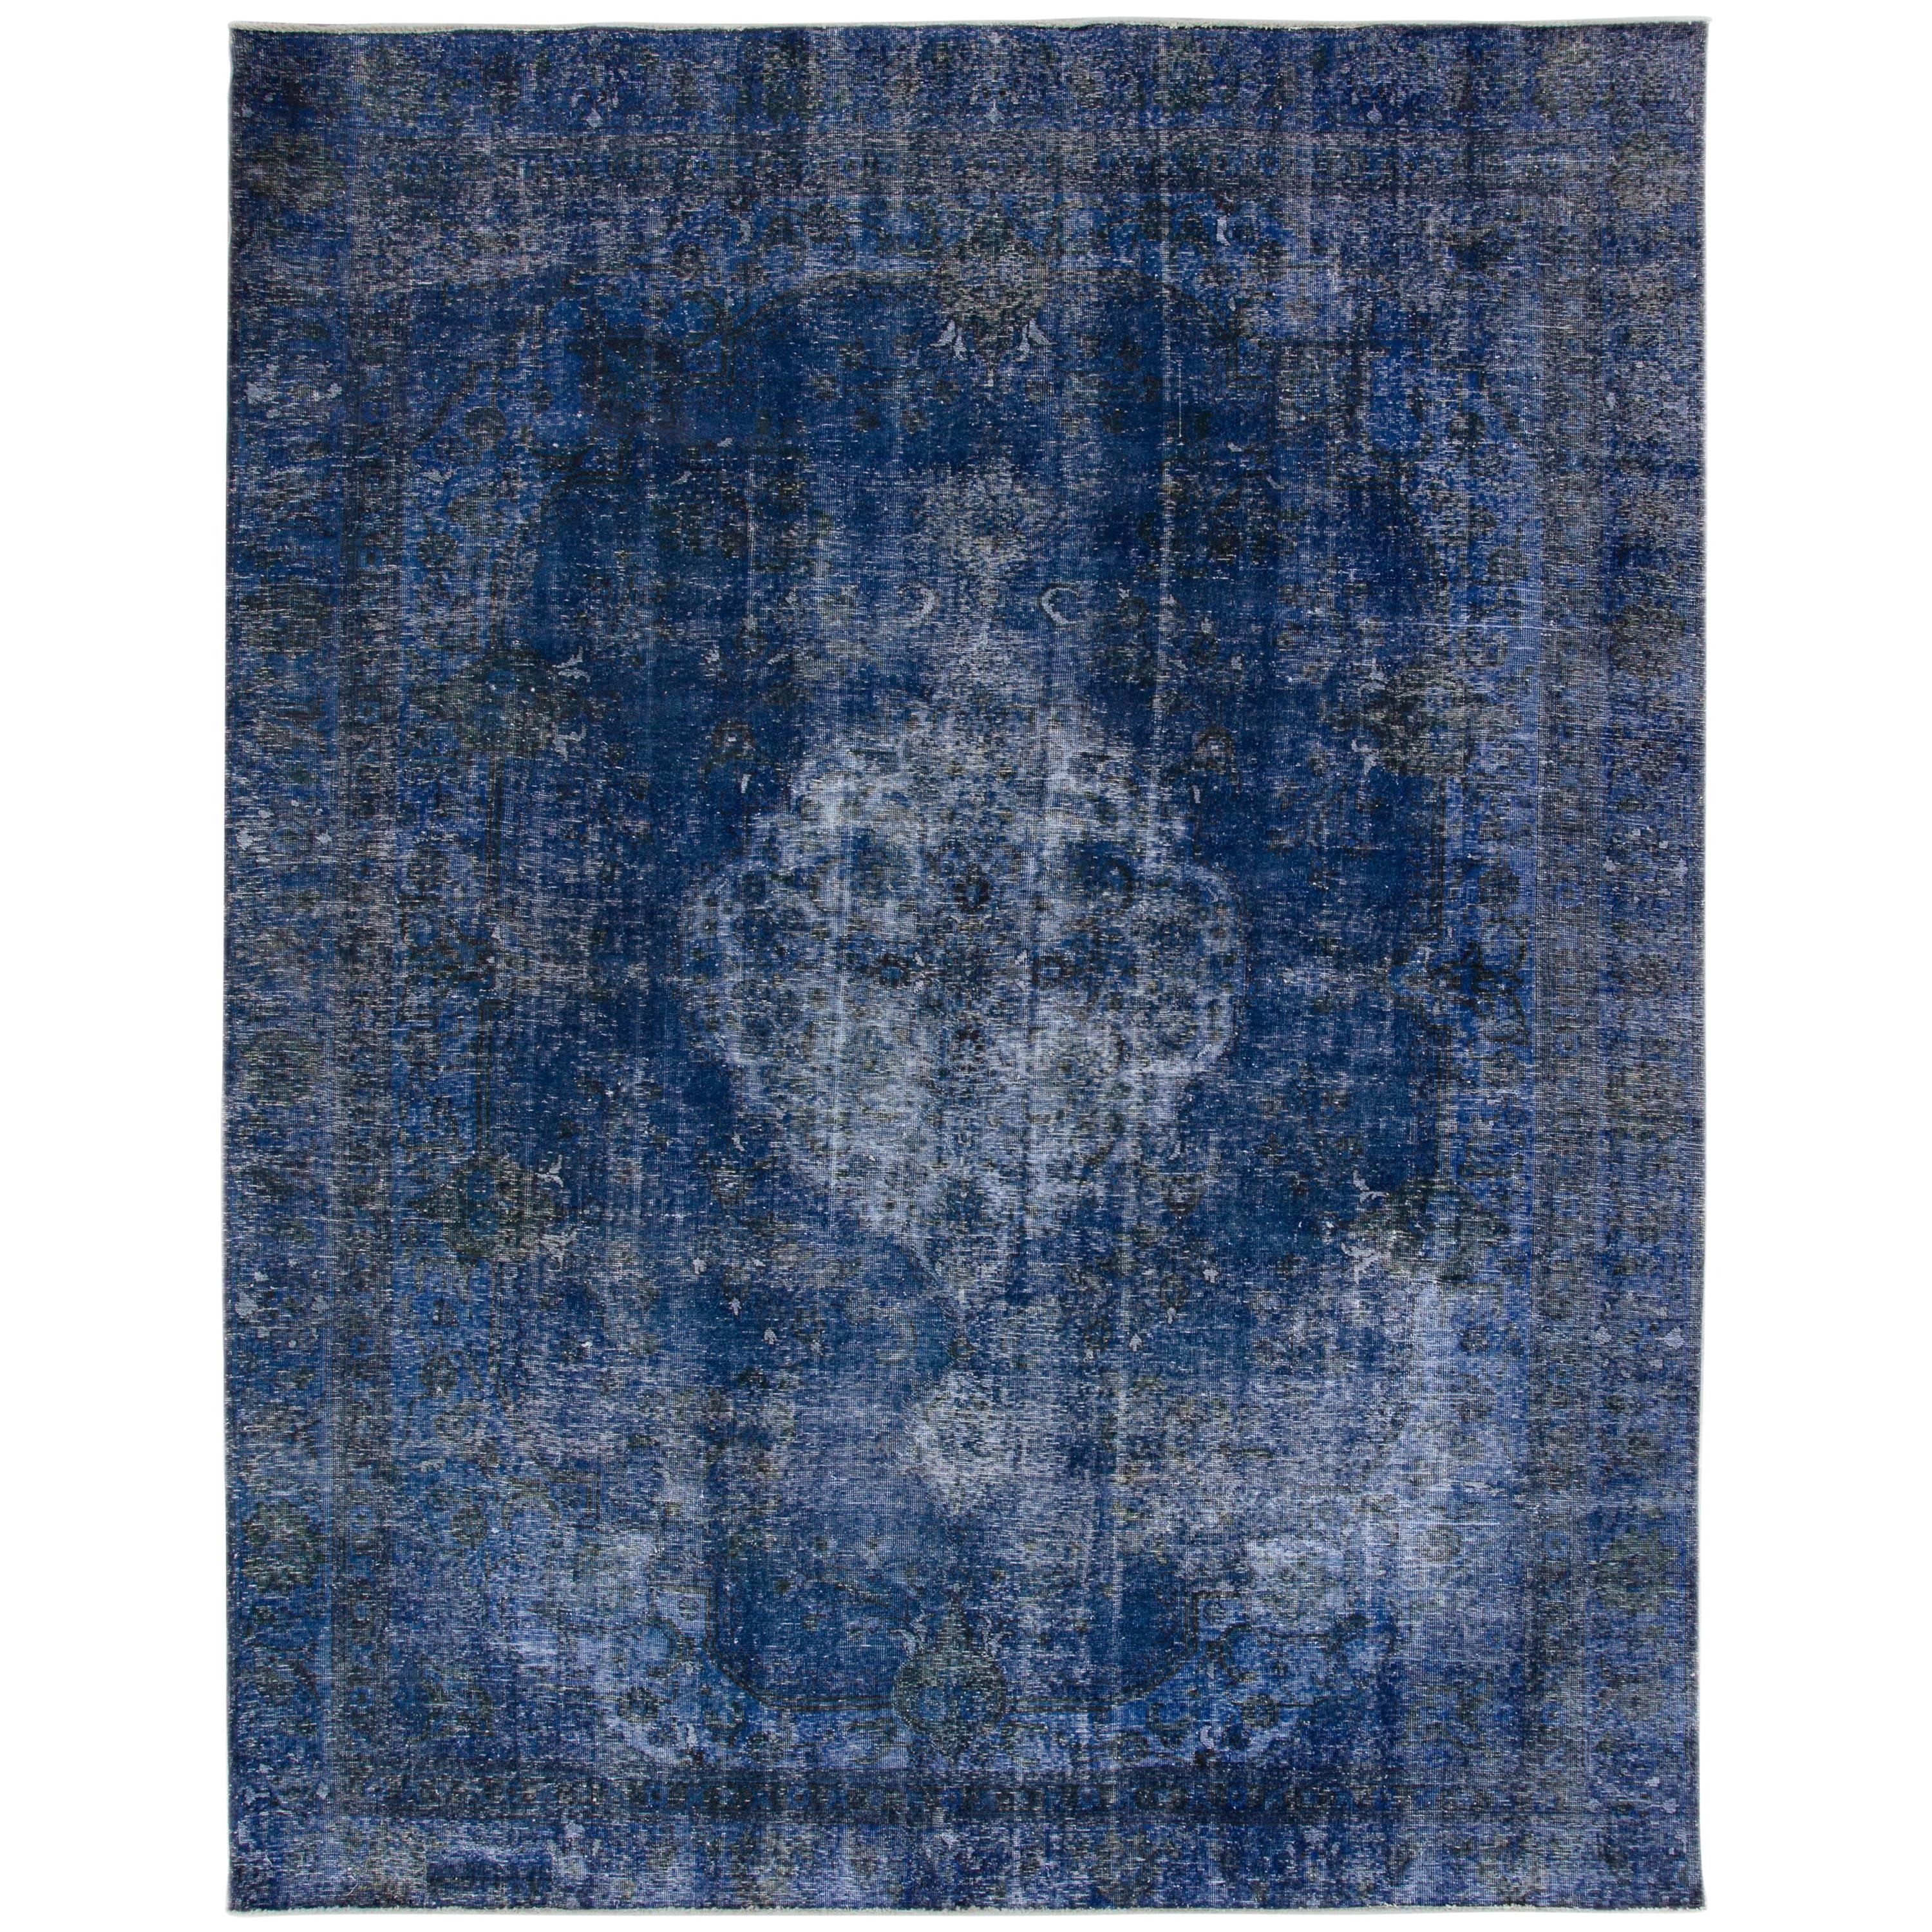 Vintage 1950s Blue Overdyed Persian Rug